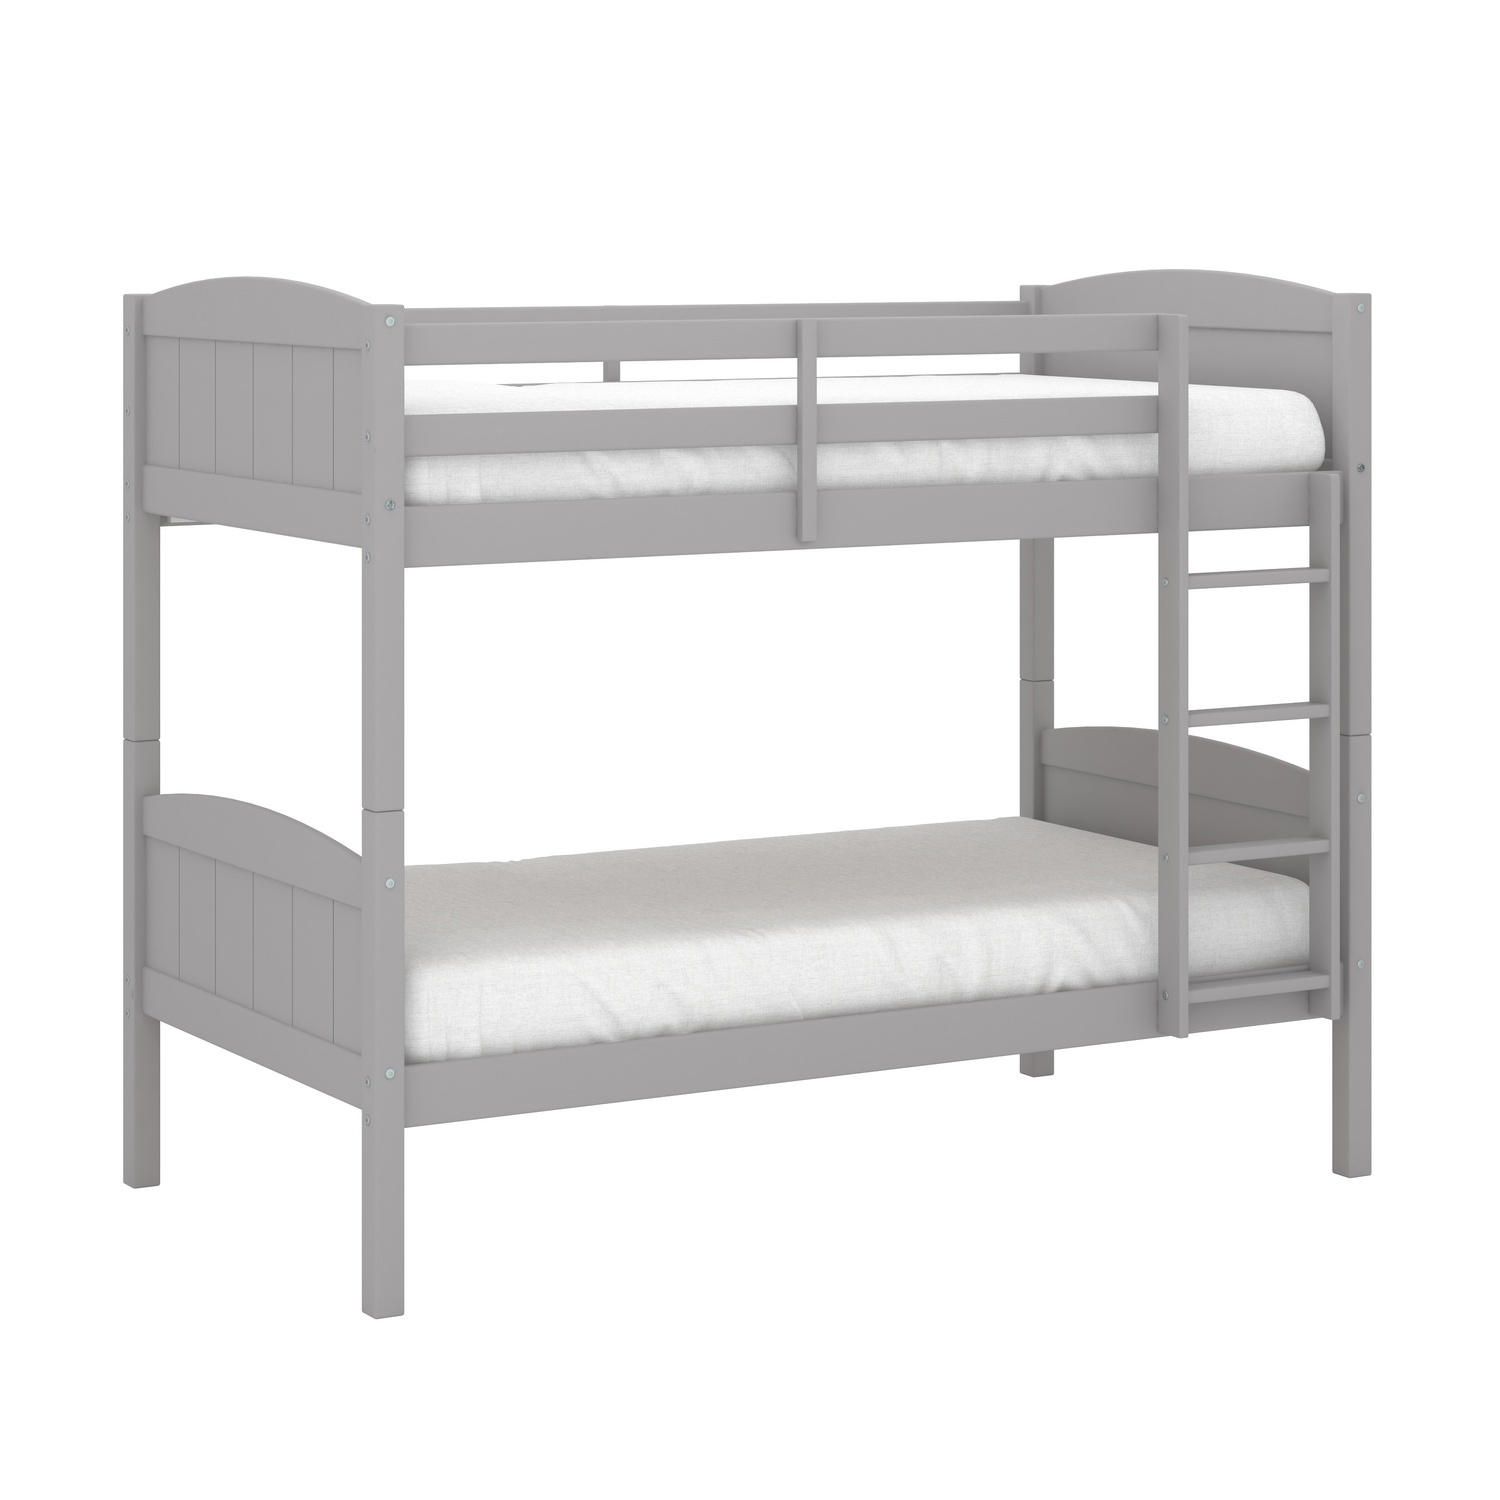 Hillsdale Alexis Wood Arch Twin Over Twin Bunk Bed - Gray